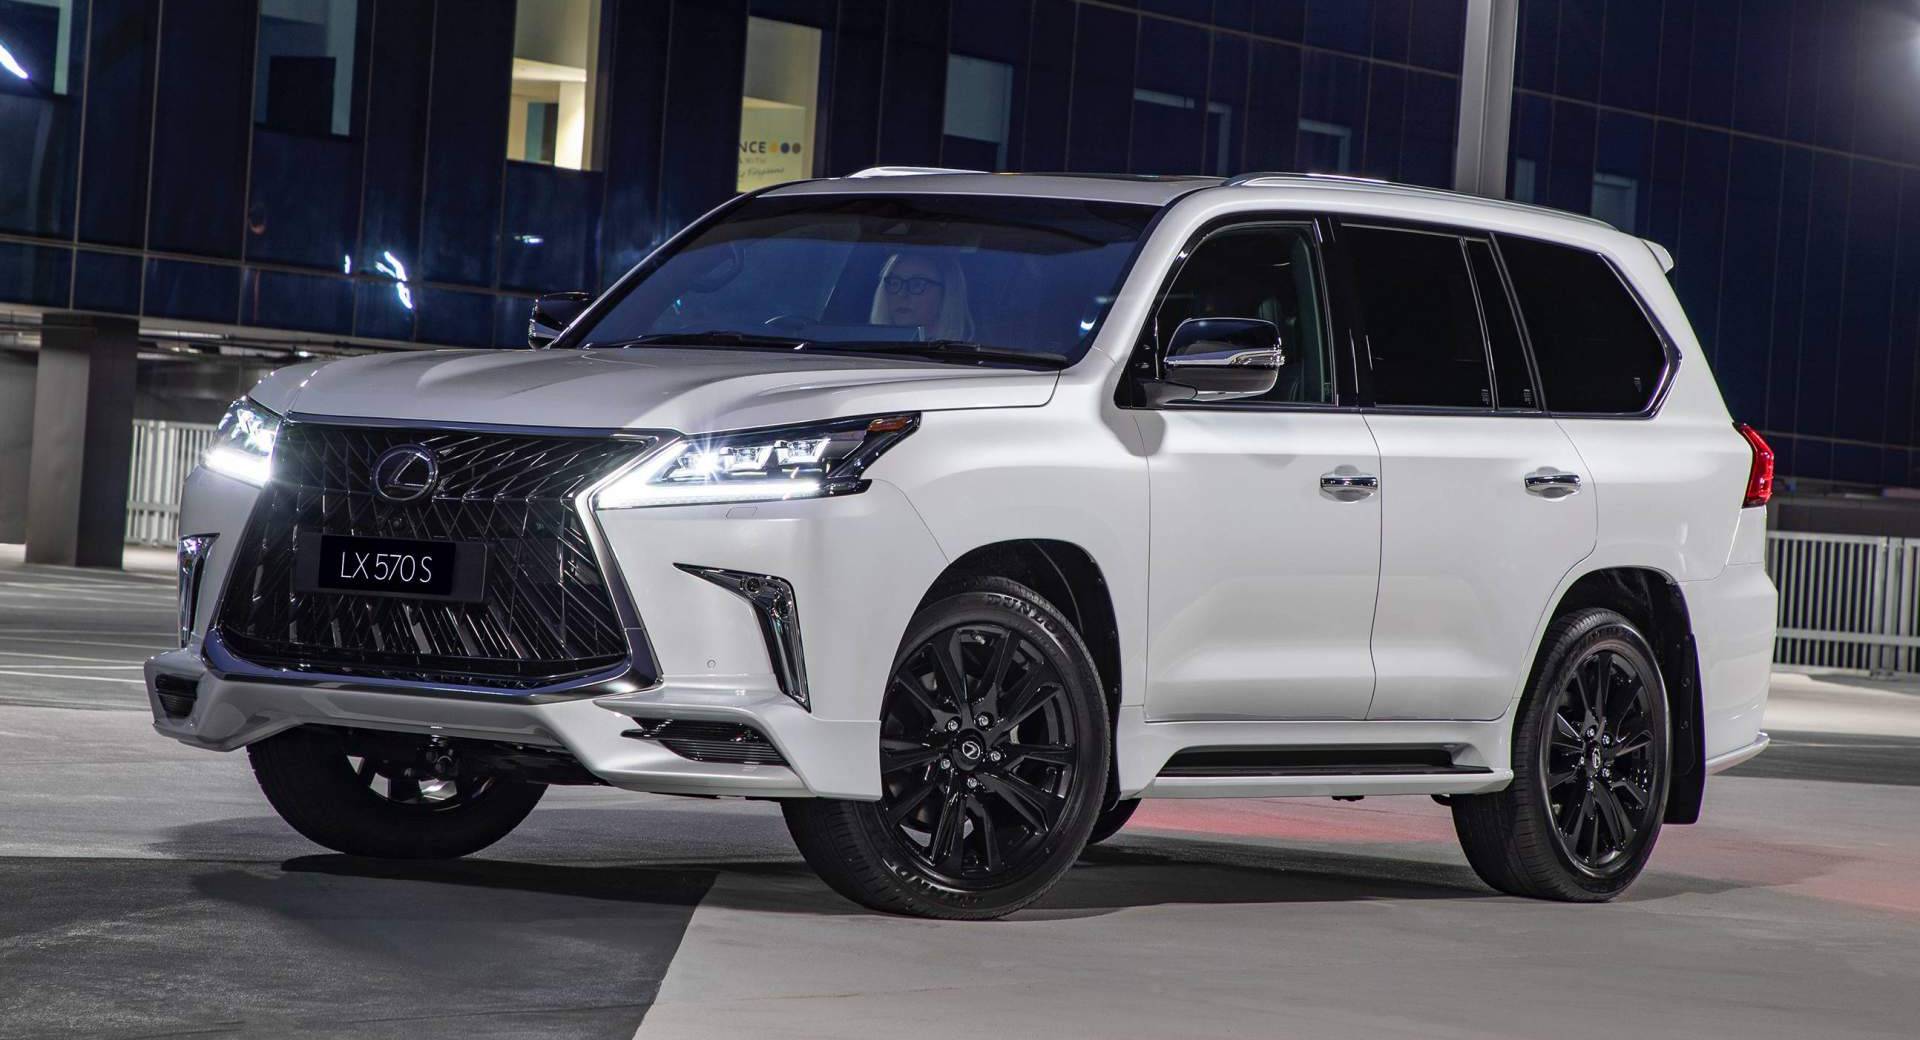 New Lexus Lx 570 S Goes Official In Australia For A